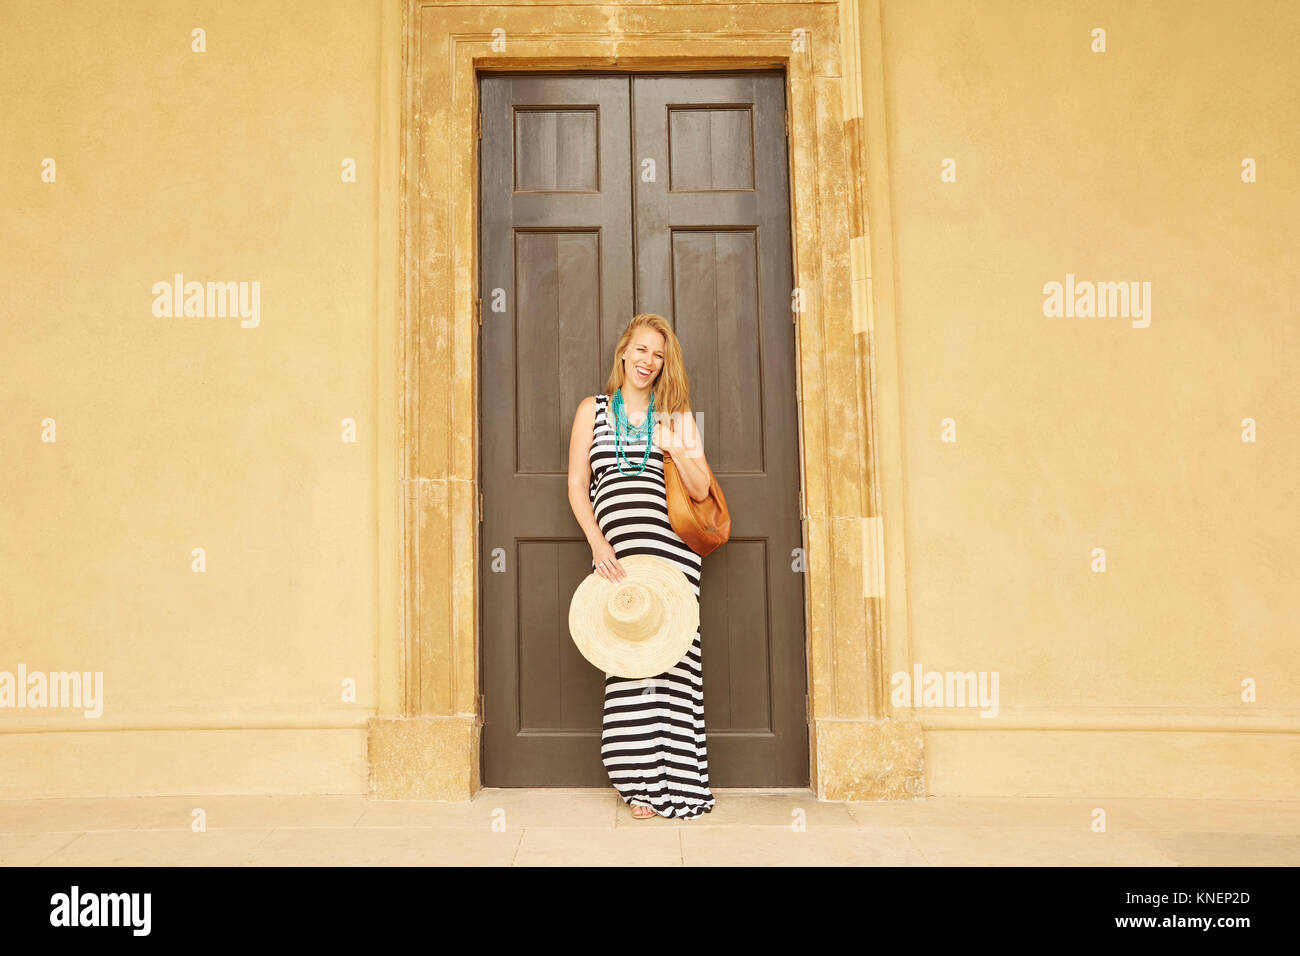 Pregnant woman posing against large double doors Stock Photo